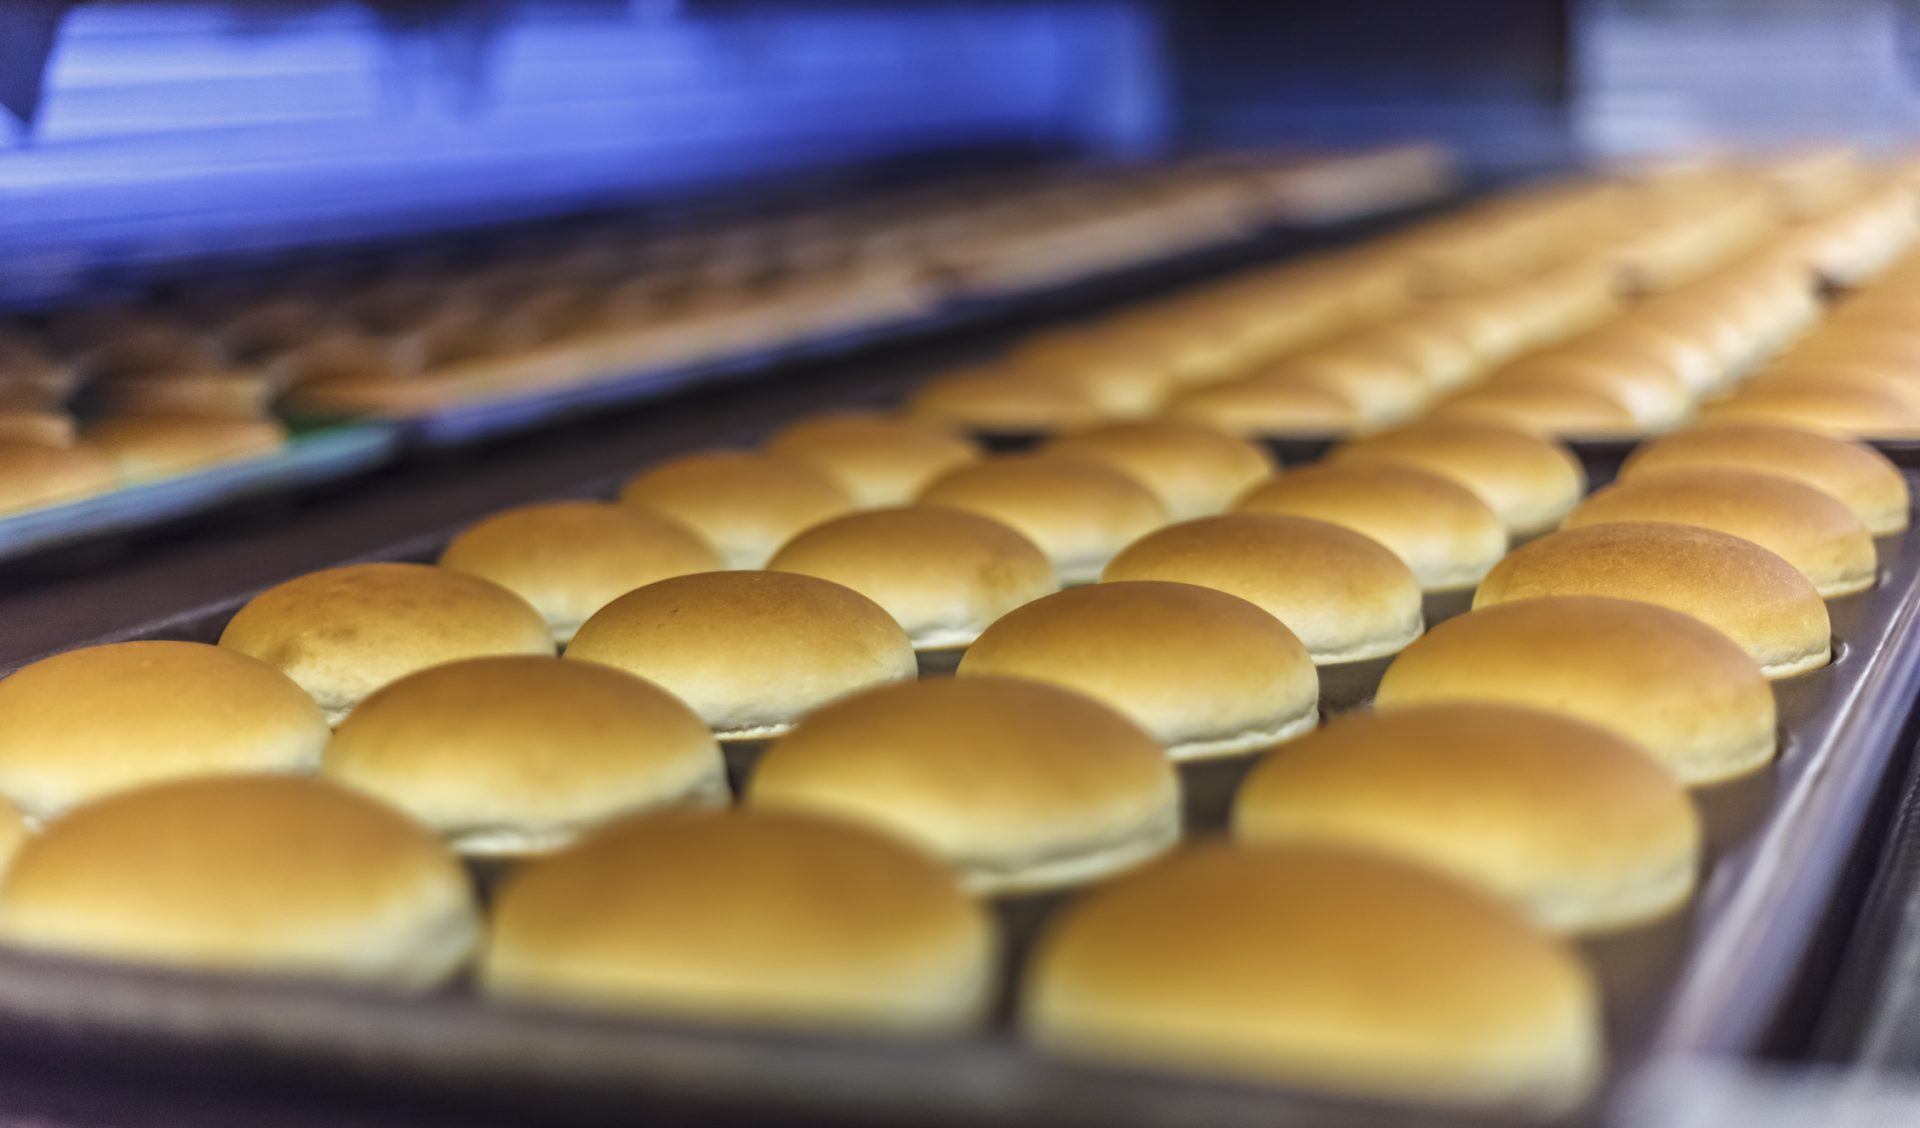 Hamburger buns in a bakery. GFSI certification and GFSI consulting is common for bakeries.